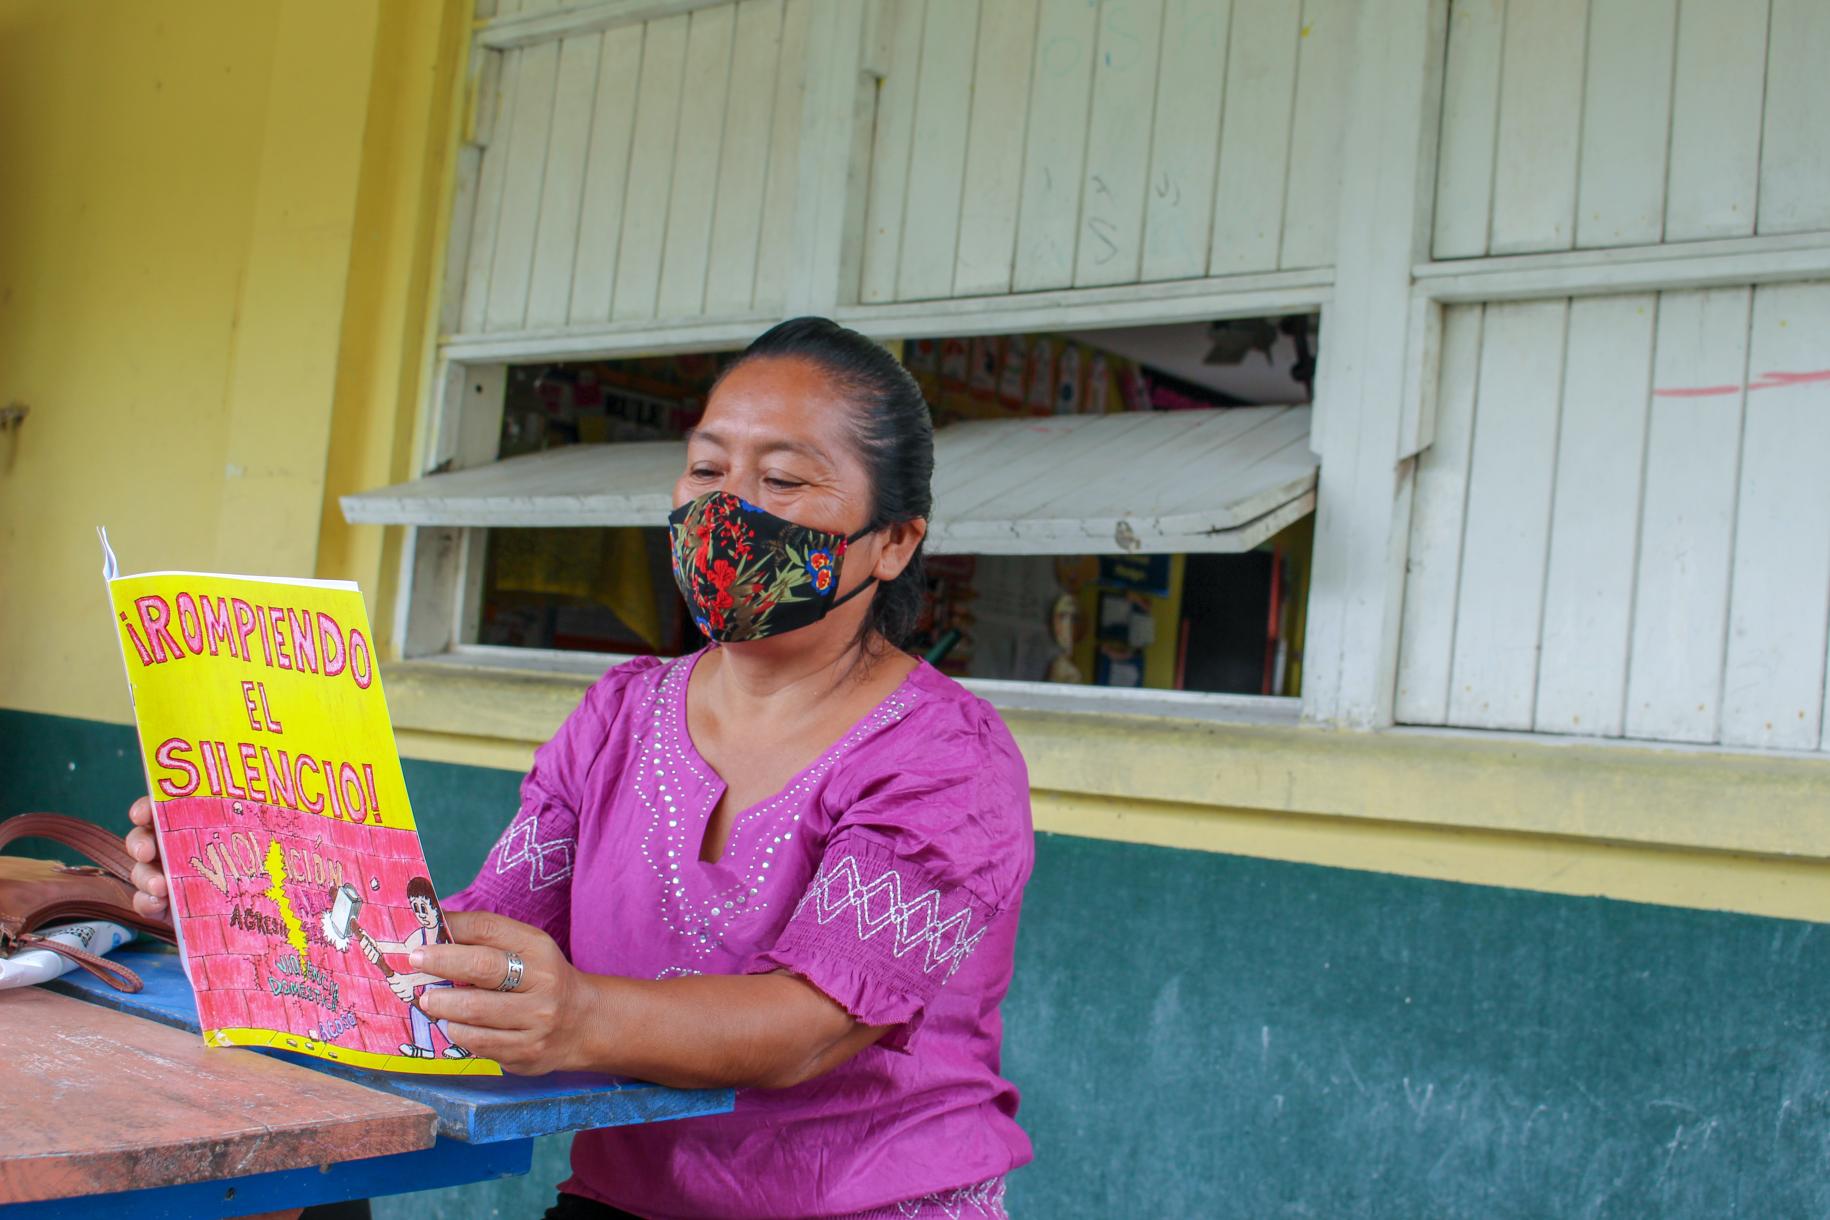 A woman in a colorful face mask and purple shirt reads a book while sitting at a table.